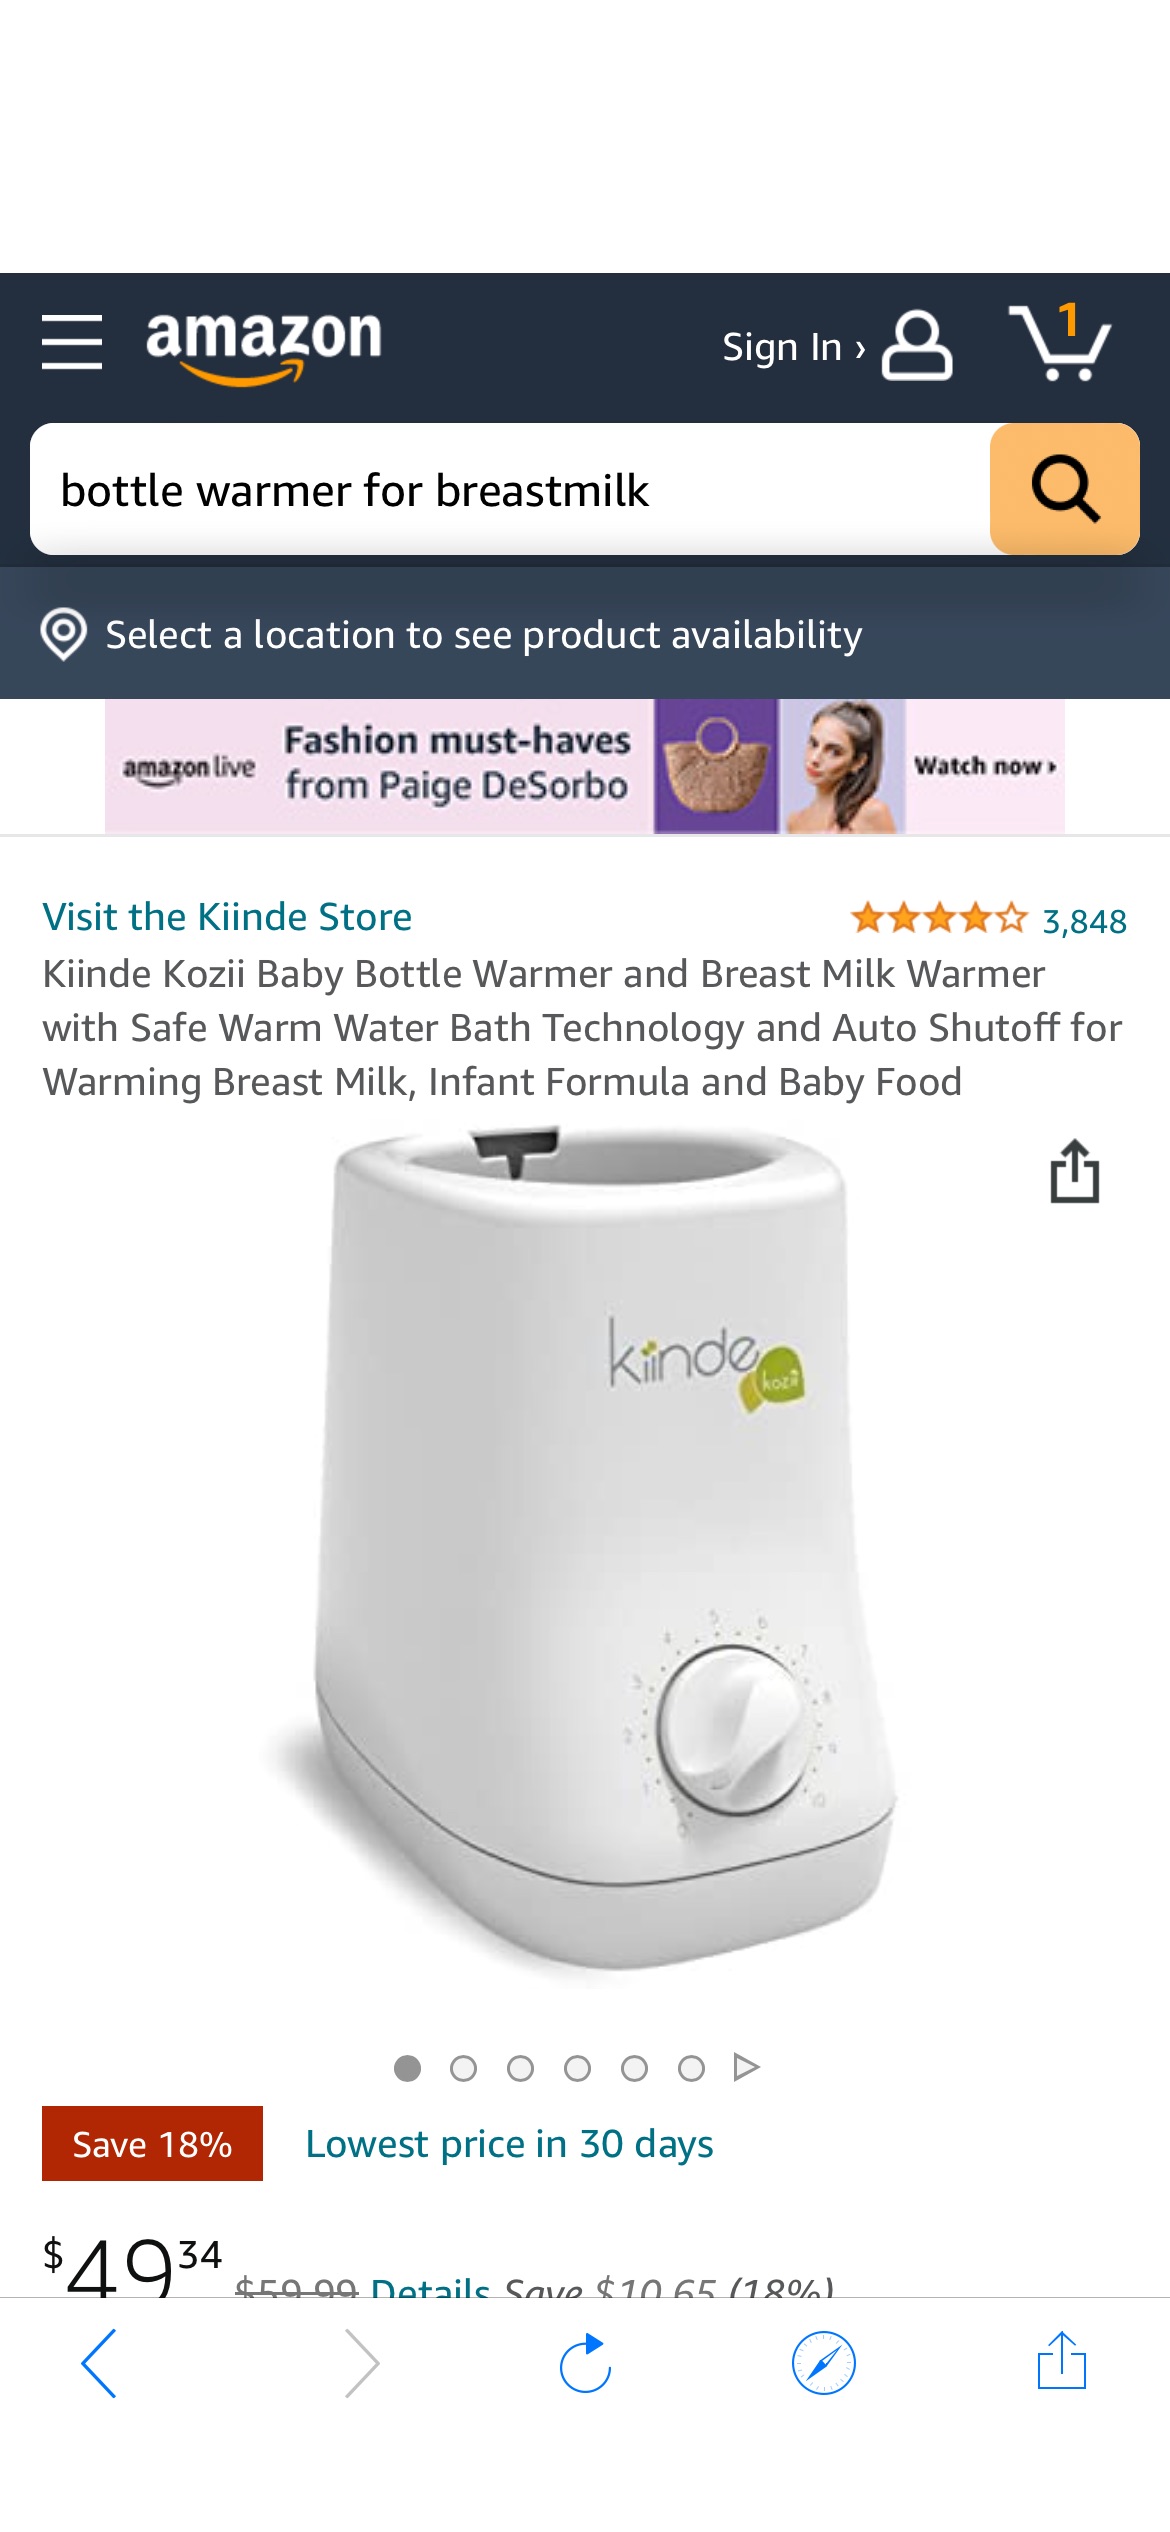 Amazon.com : Kiinde Kozii Baby Bottle Warmer and Breast Milk Warmer with Safe Warm Water Bath Technology and Auto Shutoff for Warming Breast Milk, 温奶器